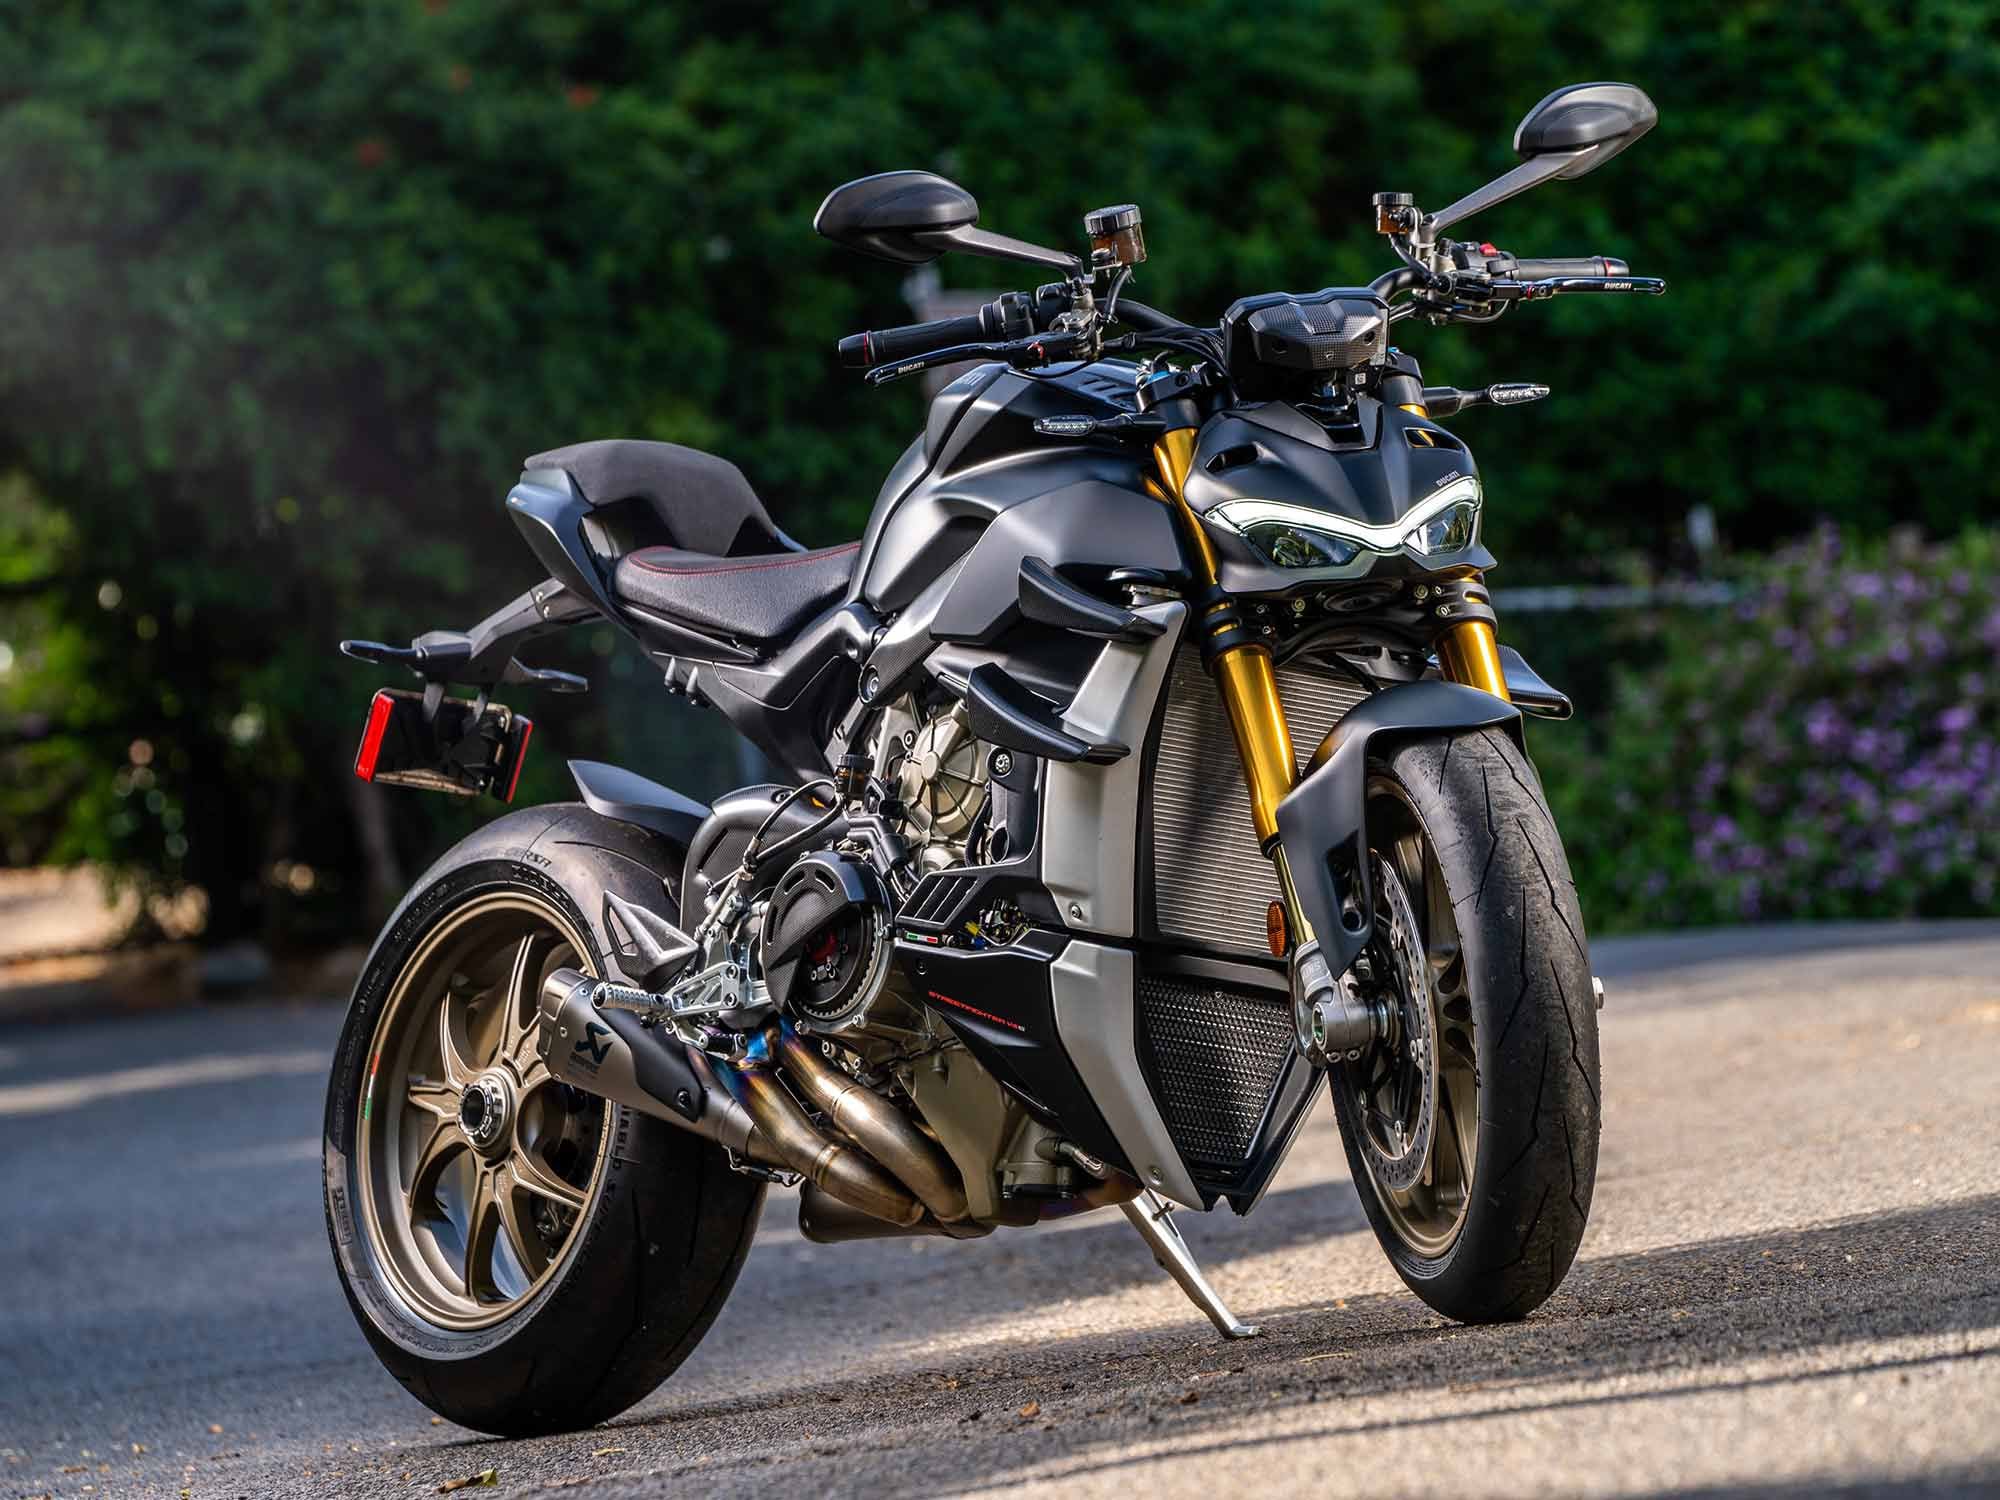 Ducati’s 2021 Streetfighter V4 S in the Dark Stealth colorway certainly makes a statement. Especially when draped in carbon, magnesium, and titanium components from the Ducati Performance catalog.